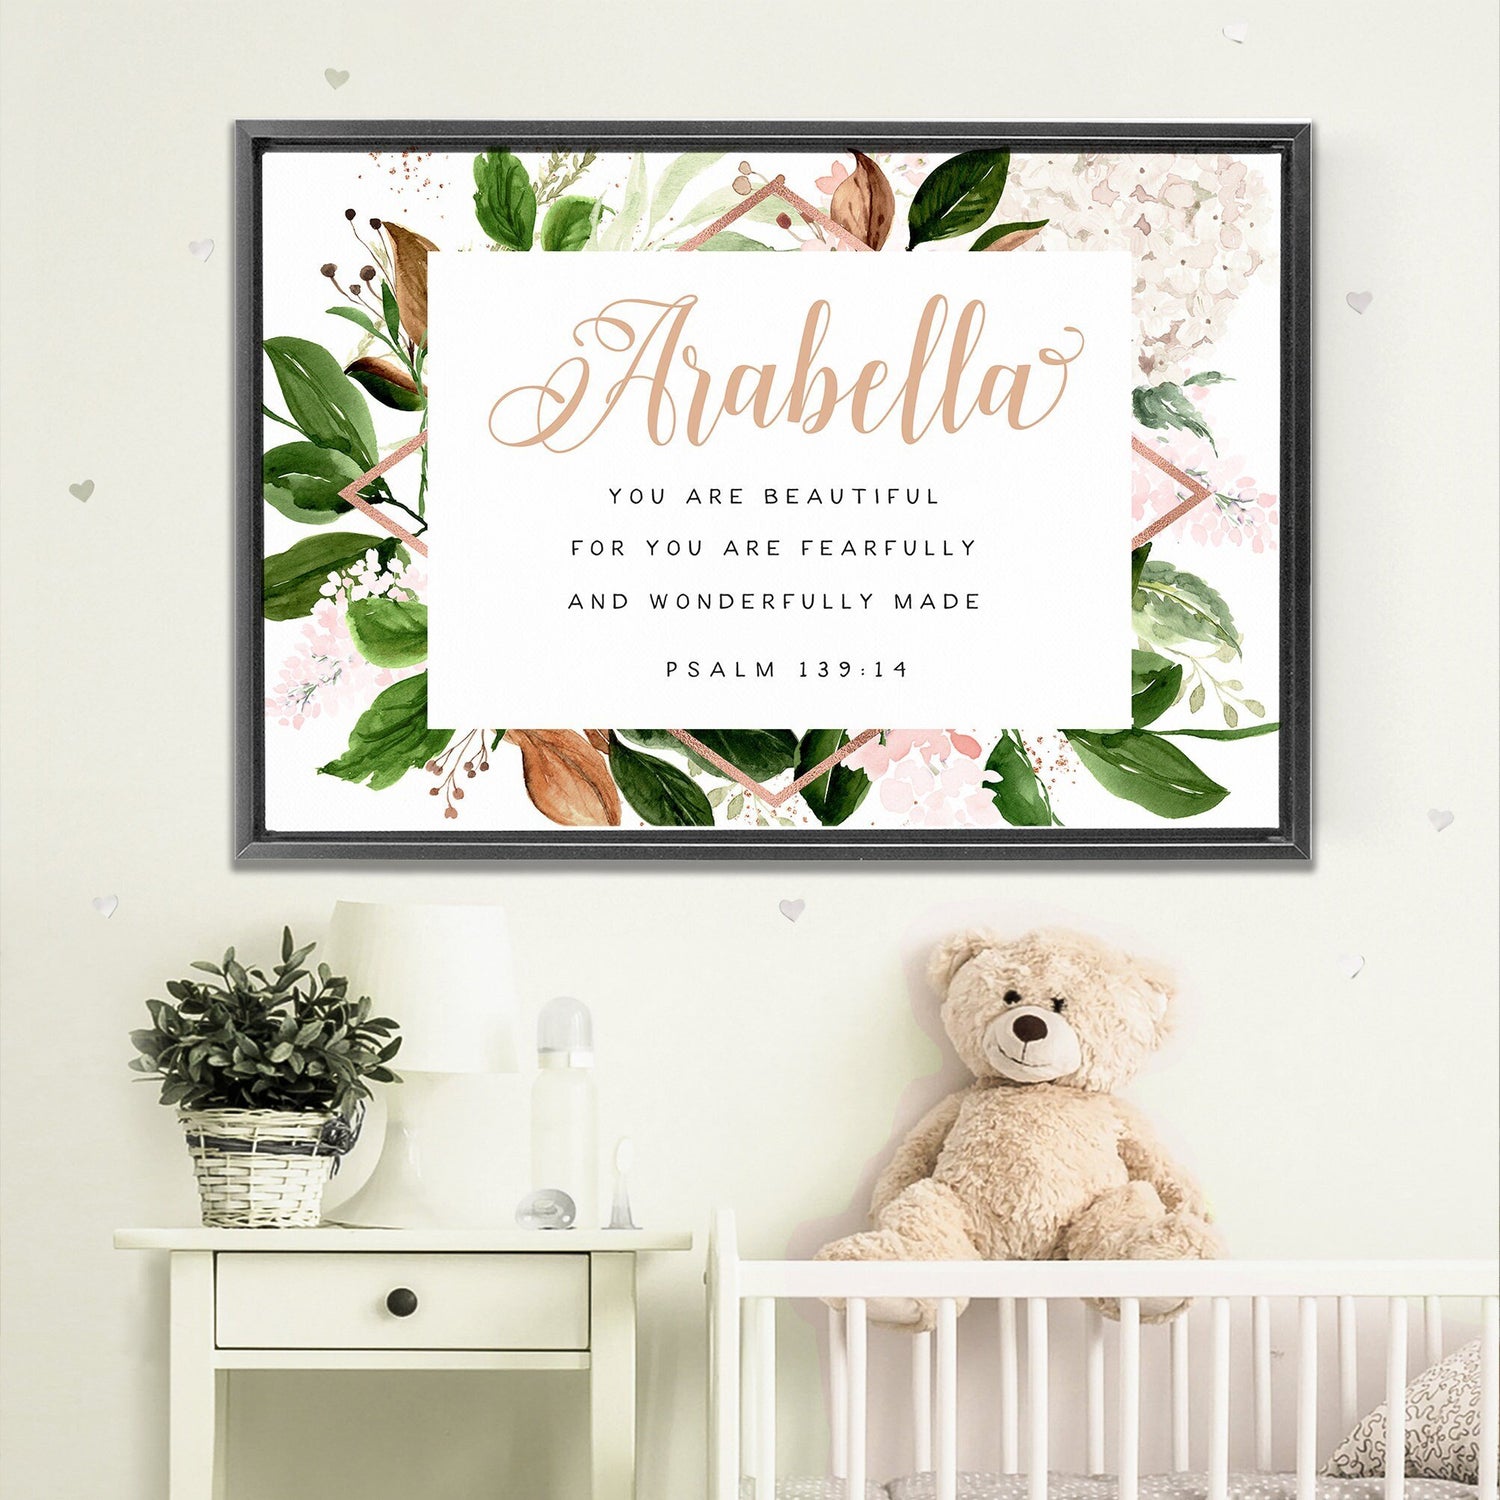 You are Fearfully and Wonderfully Made | Nursery Personalized Christian Wall Art | Scripture Wall Art Sign | Psalm 139:14 | Children's Decor - Forever Written